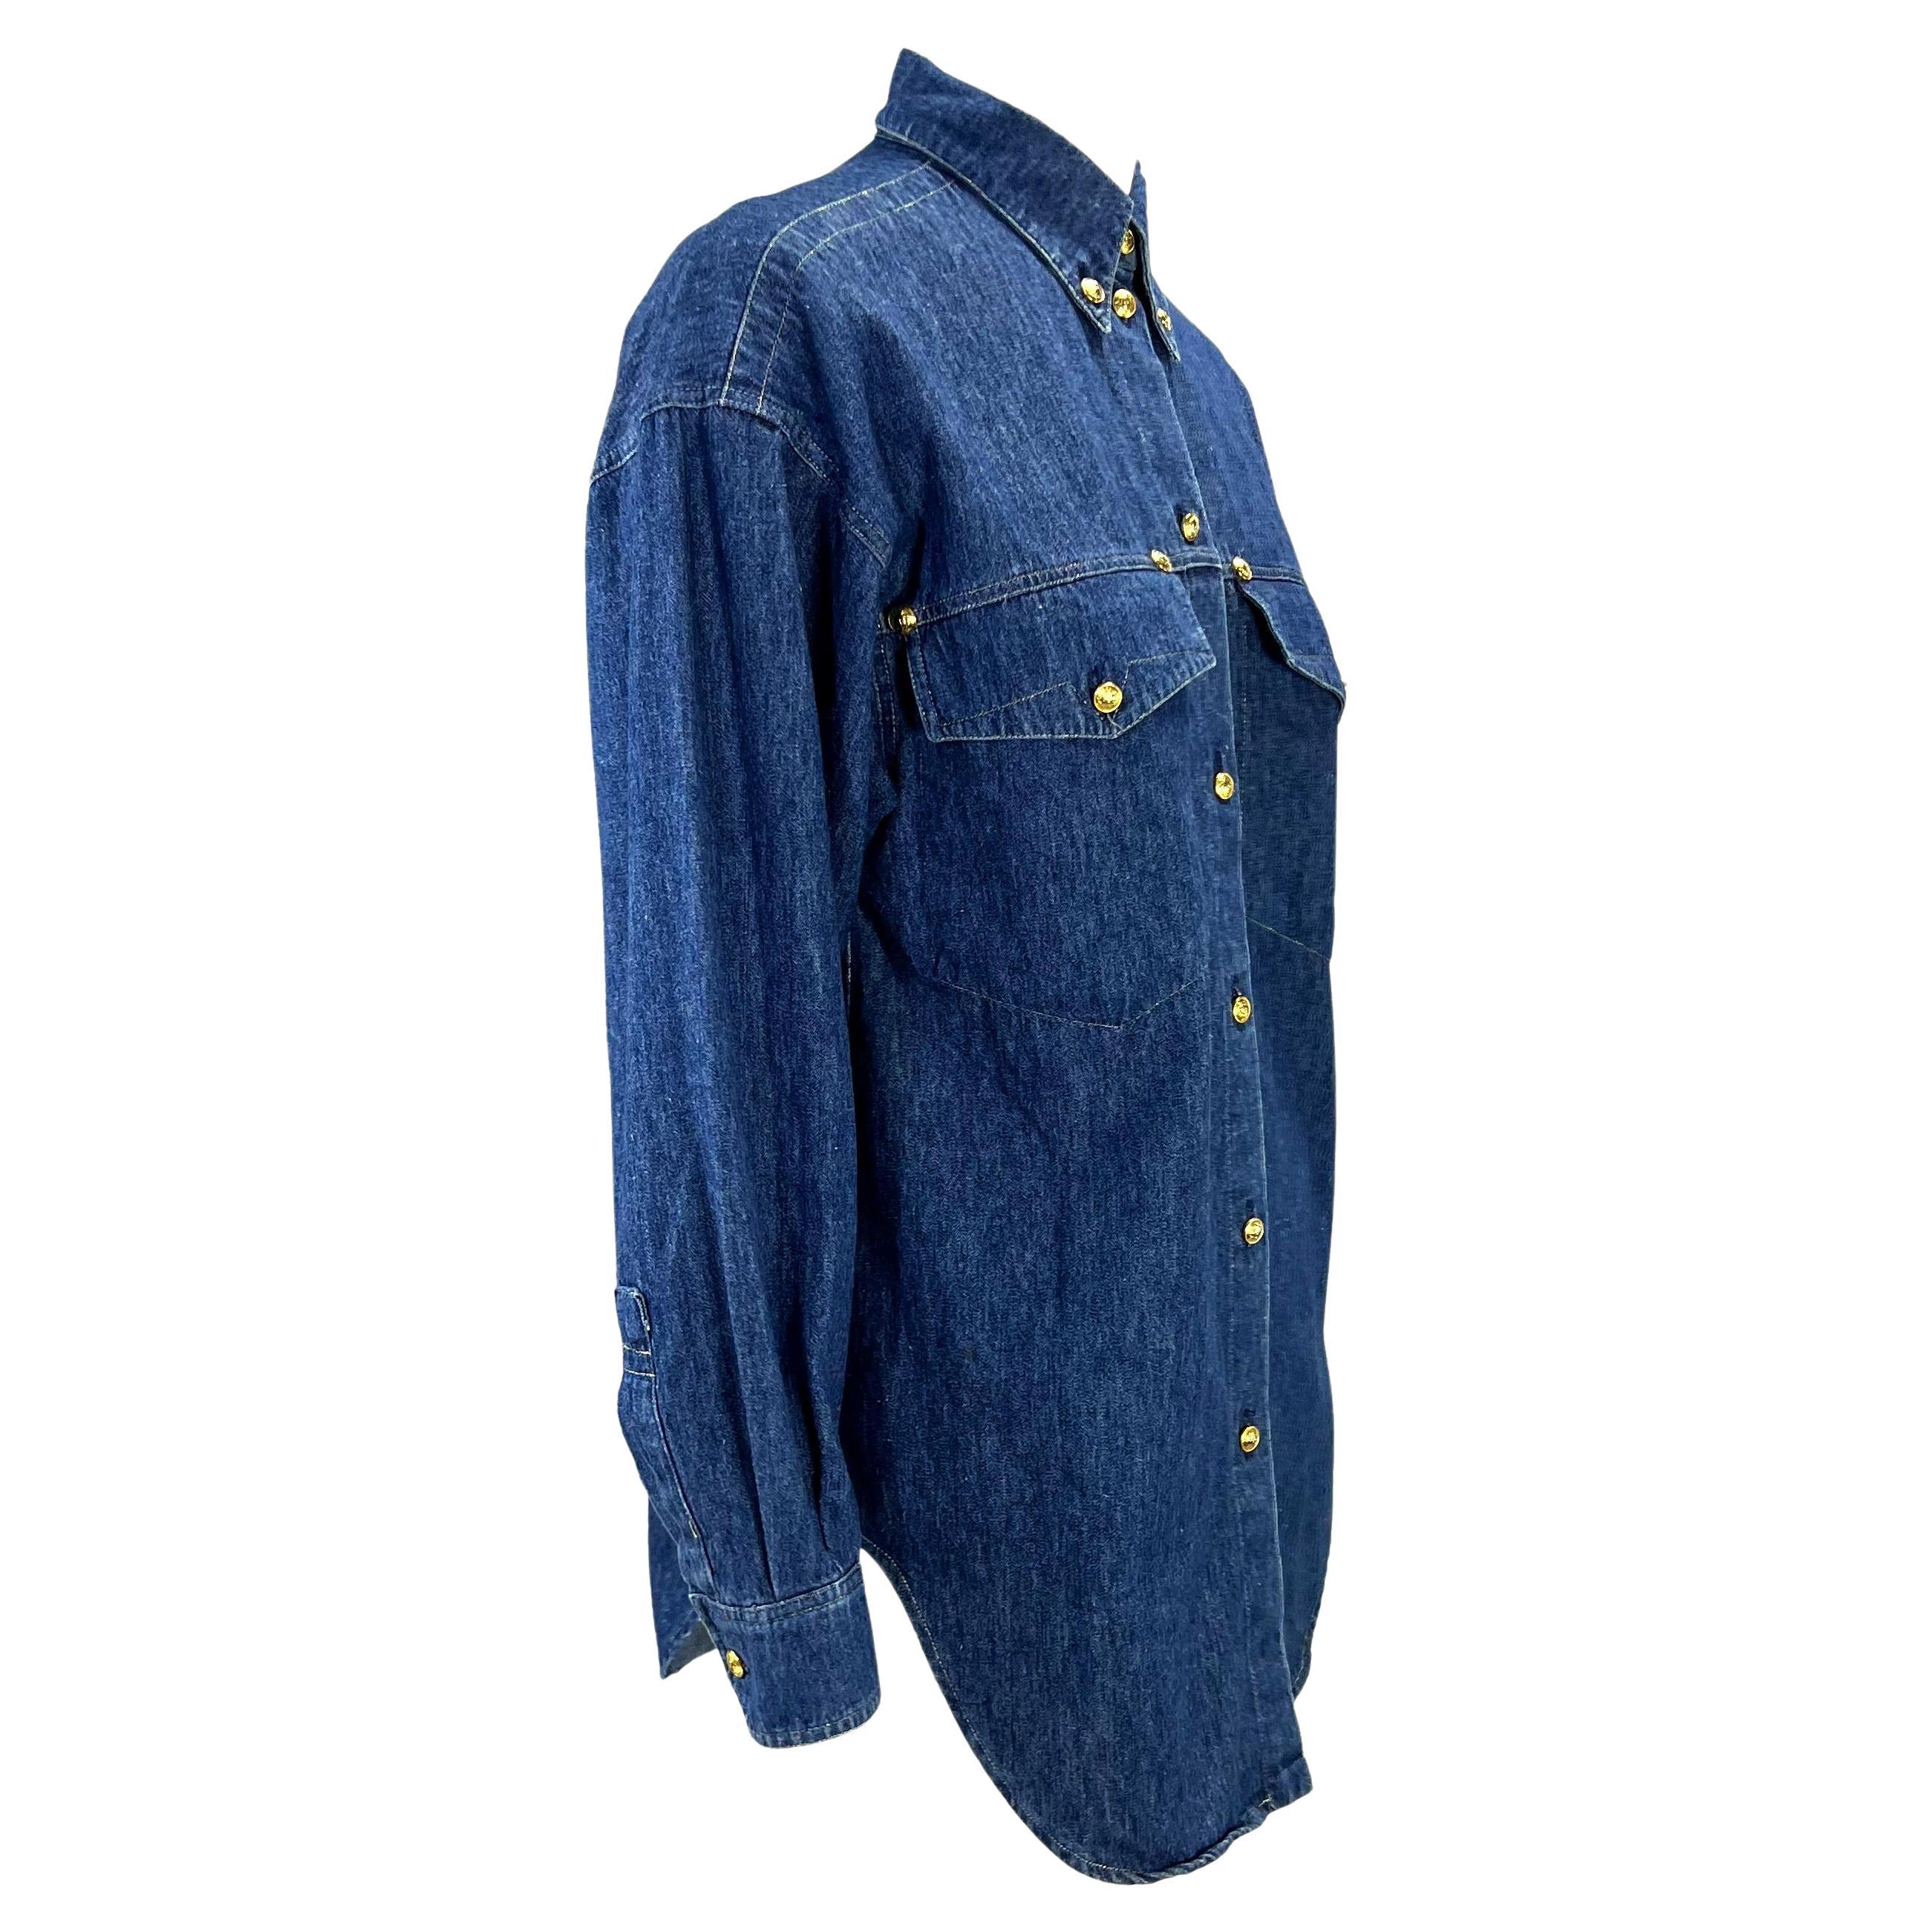 S/S 1992 Gianni Versace Runway Ad Gold Medusa Blue Jean Denim Button Down Top For Sale 9